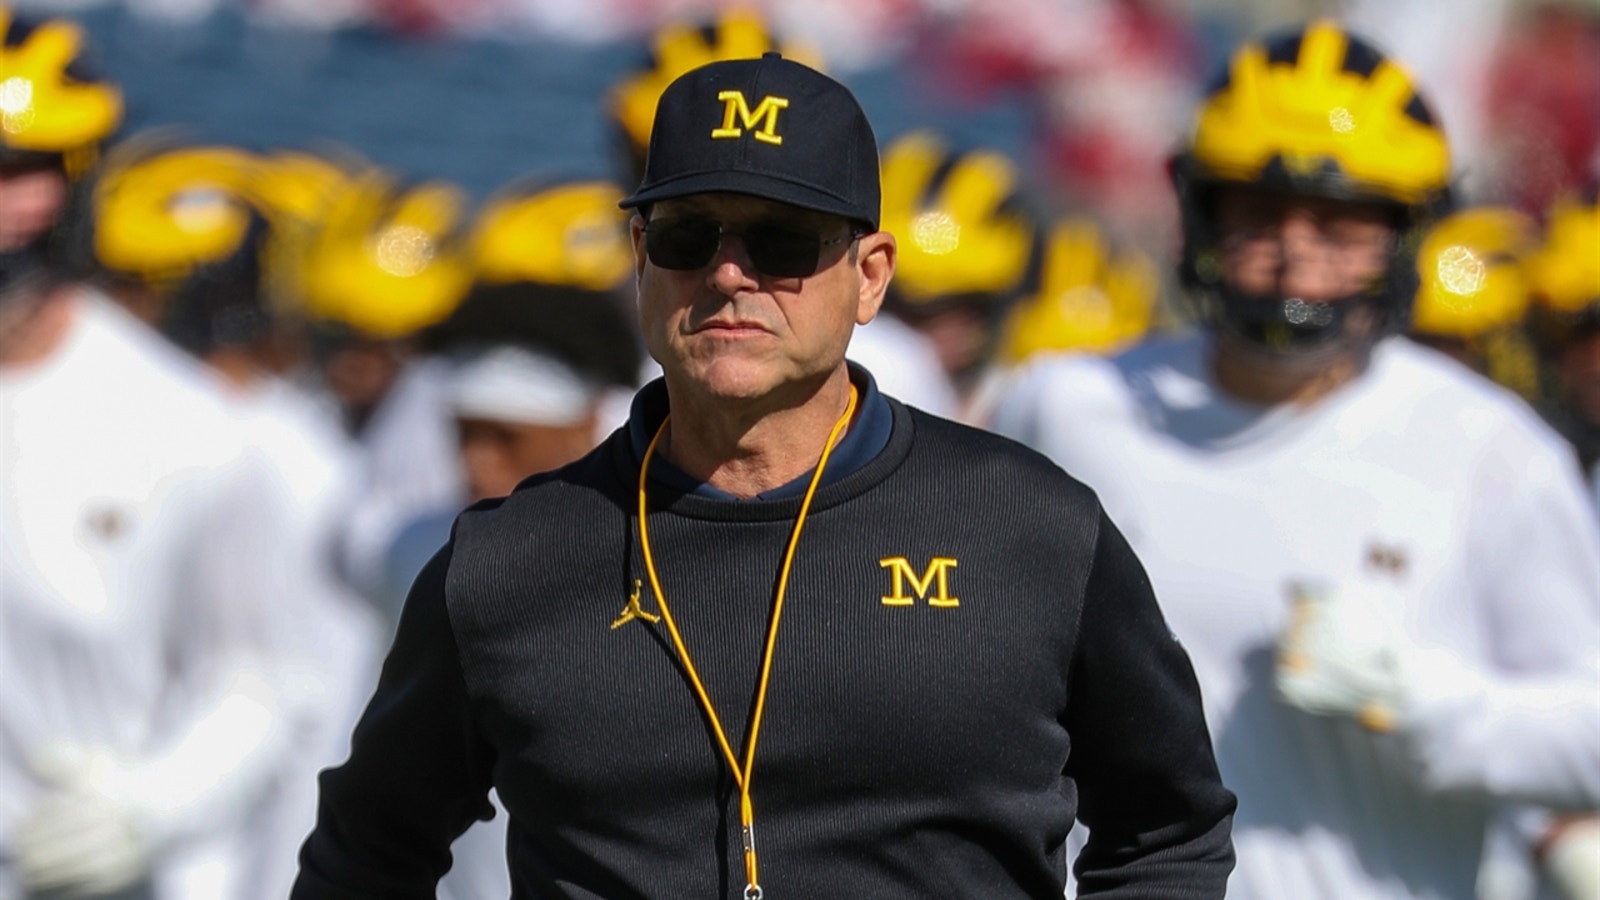 Terry Bradshaw, Howie Long discuss the pressure Jim Harbaugh faces at Michigan